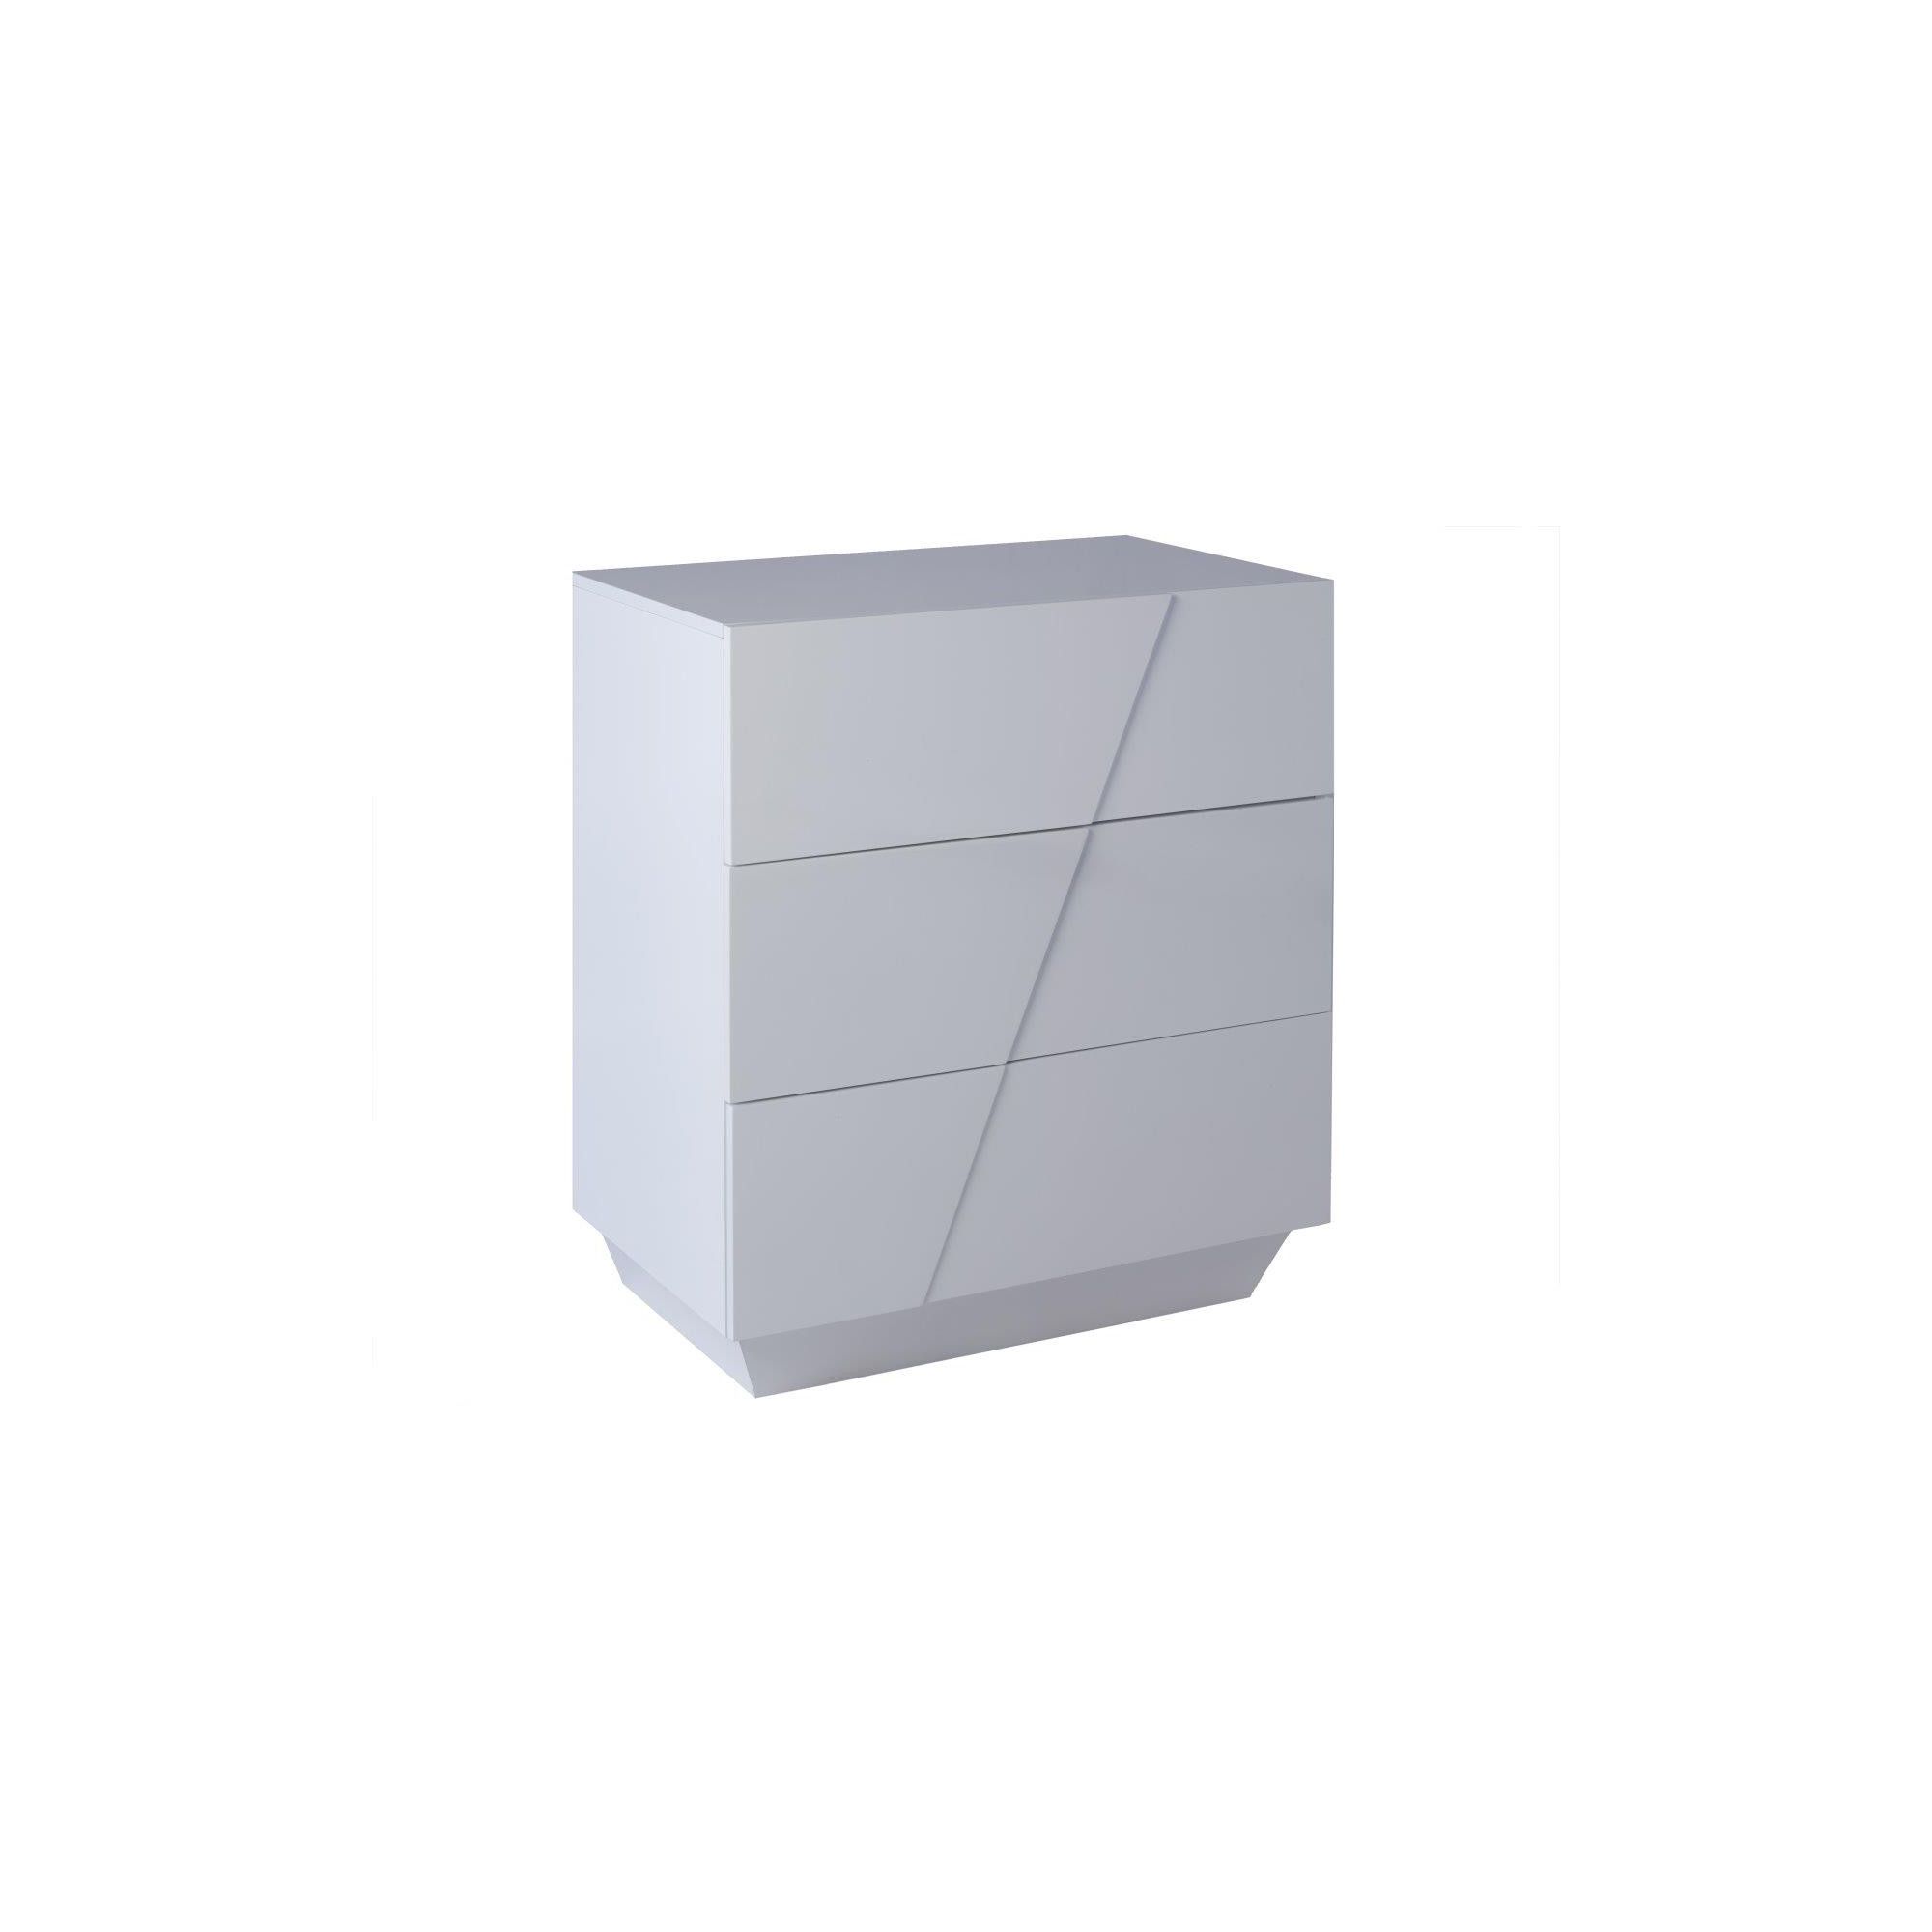 Gillmore Space Glacier Chest of Drawer - White at Tesco Direct